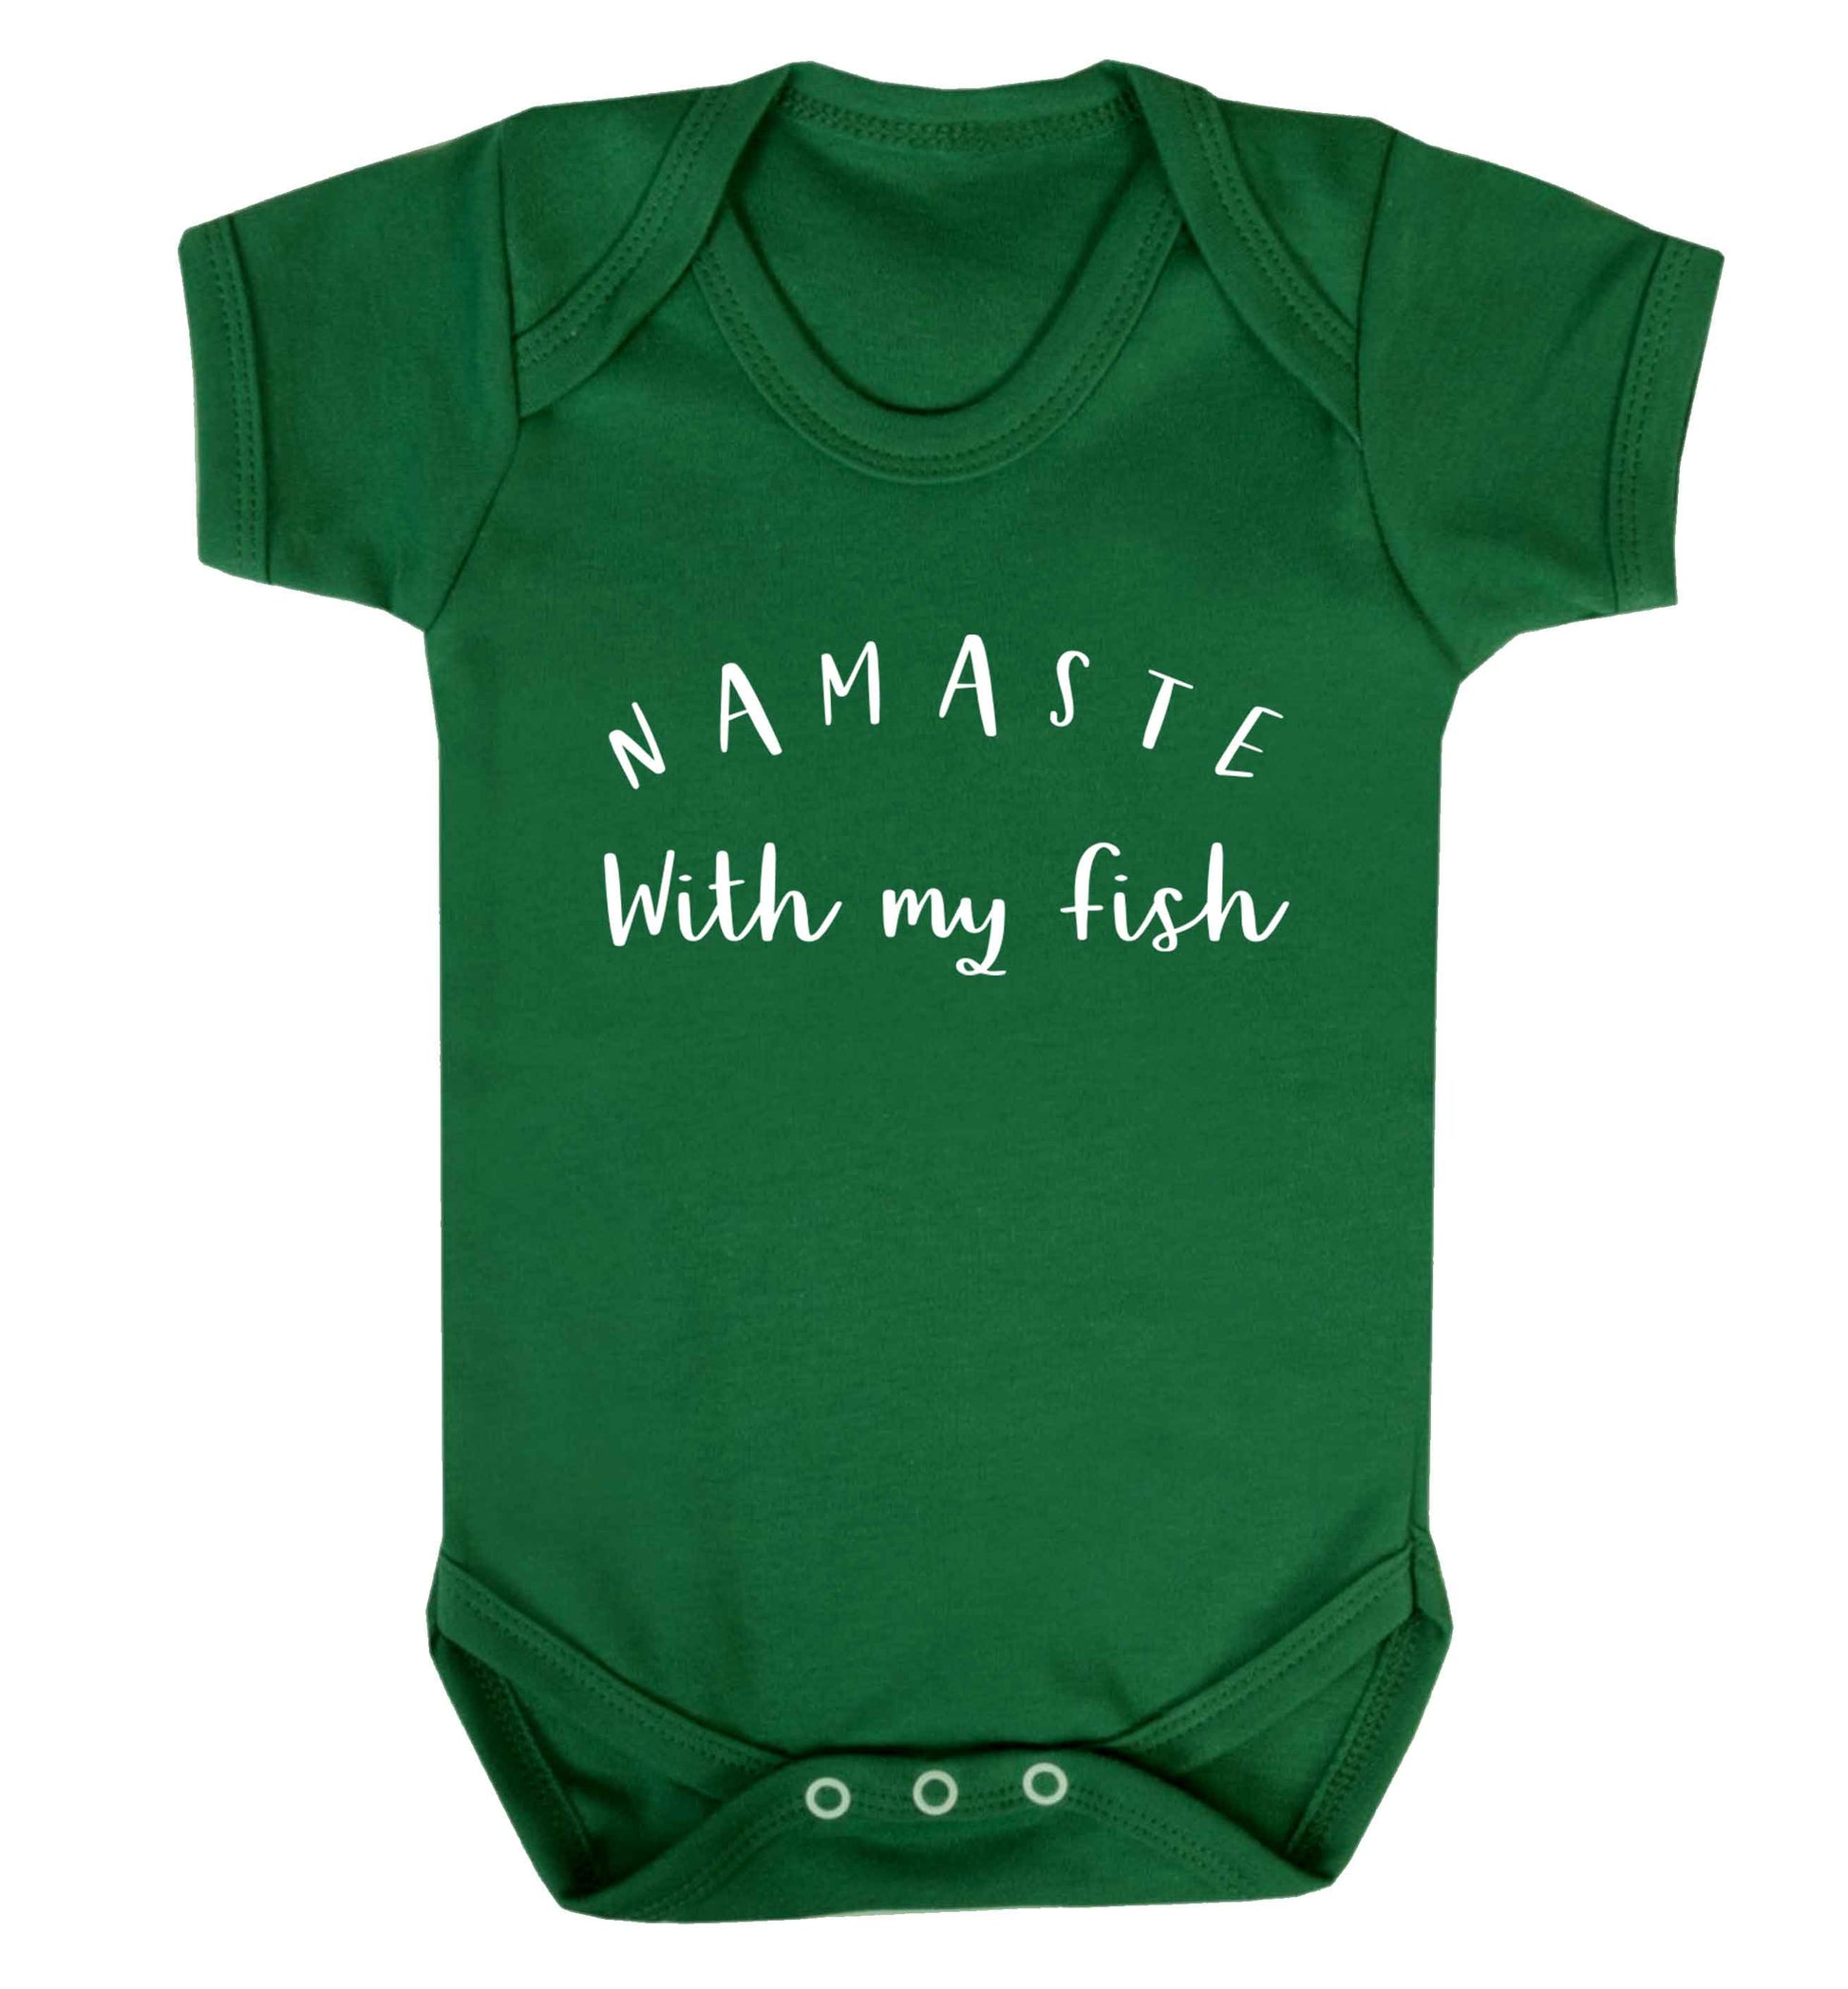 Namaste with my fish Baby Vest green 18-24 months